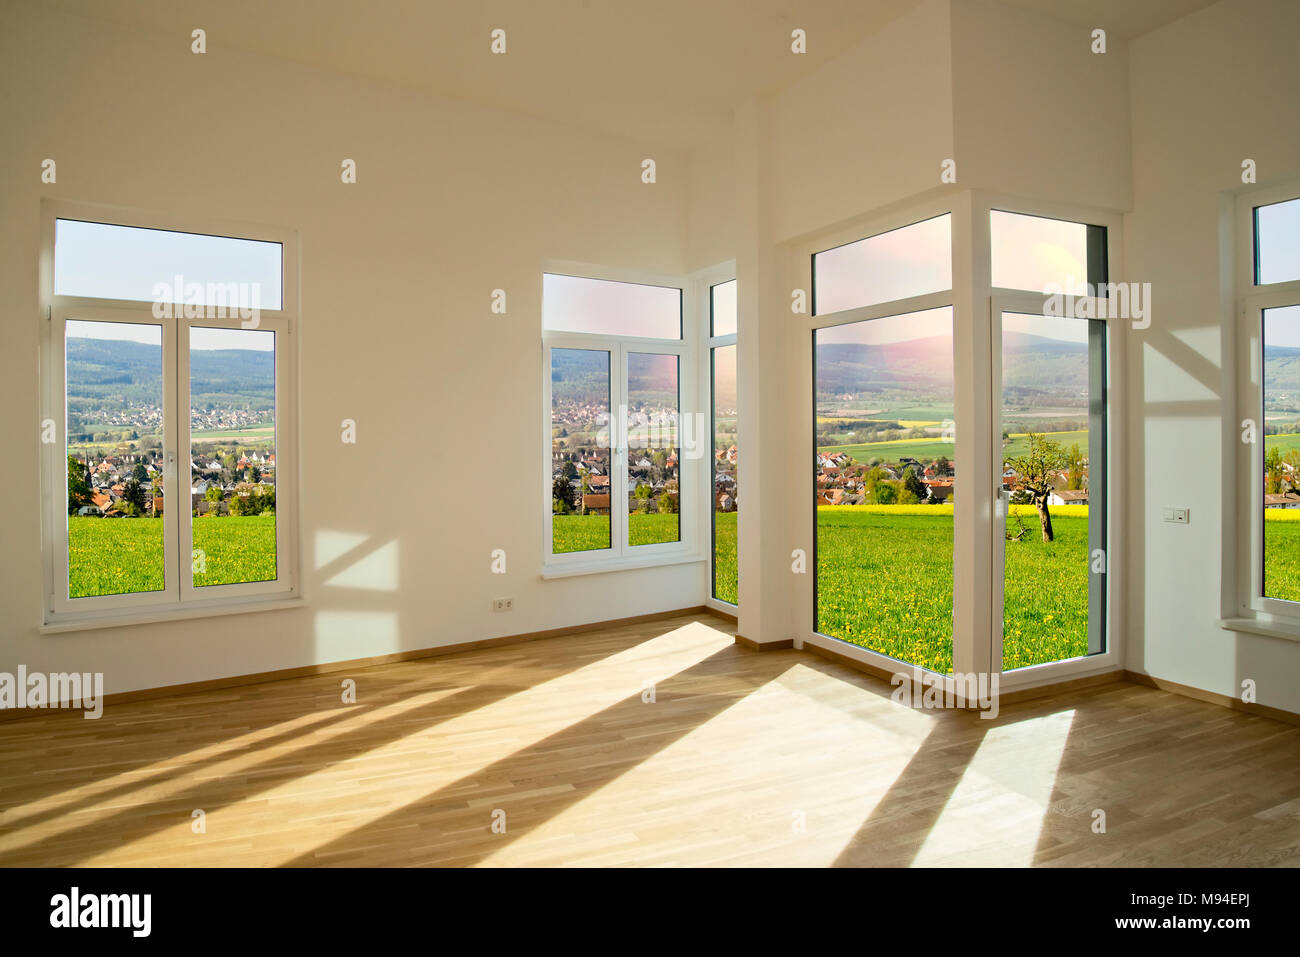 View from the interior of a new building in a rural area. Stock Photo